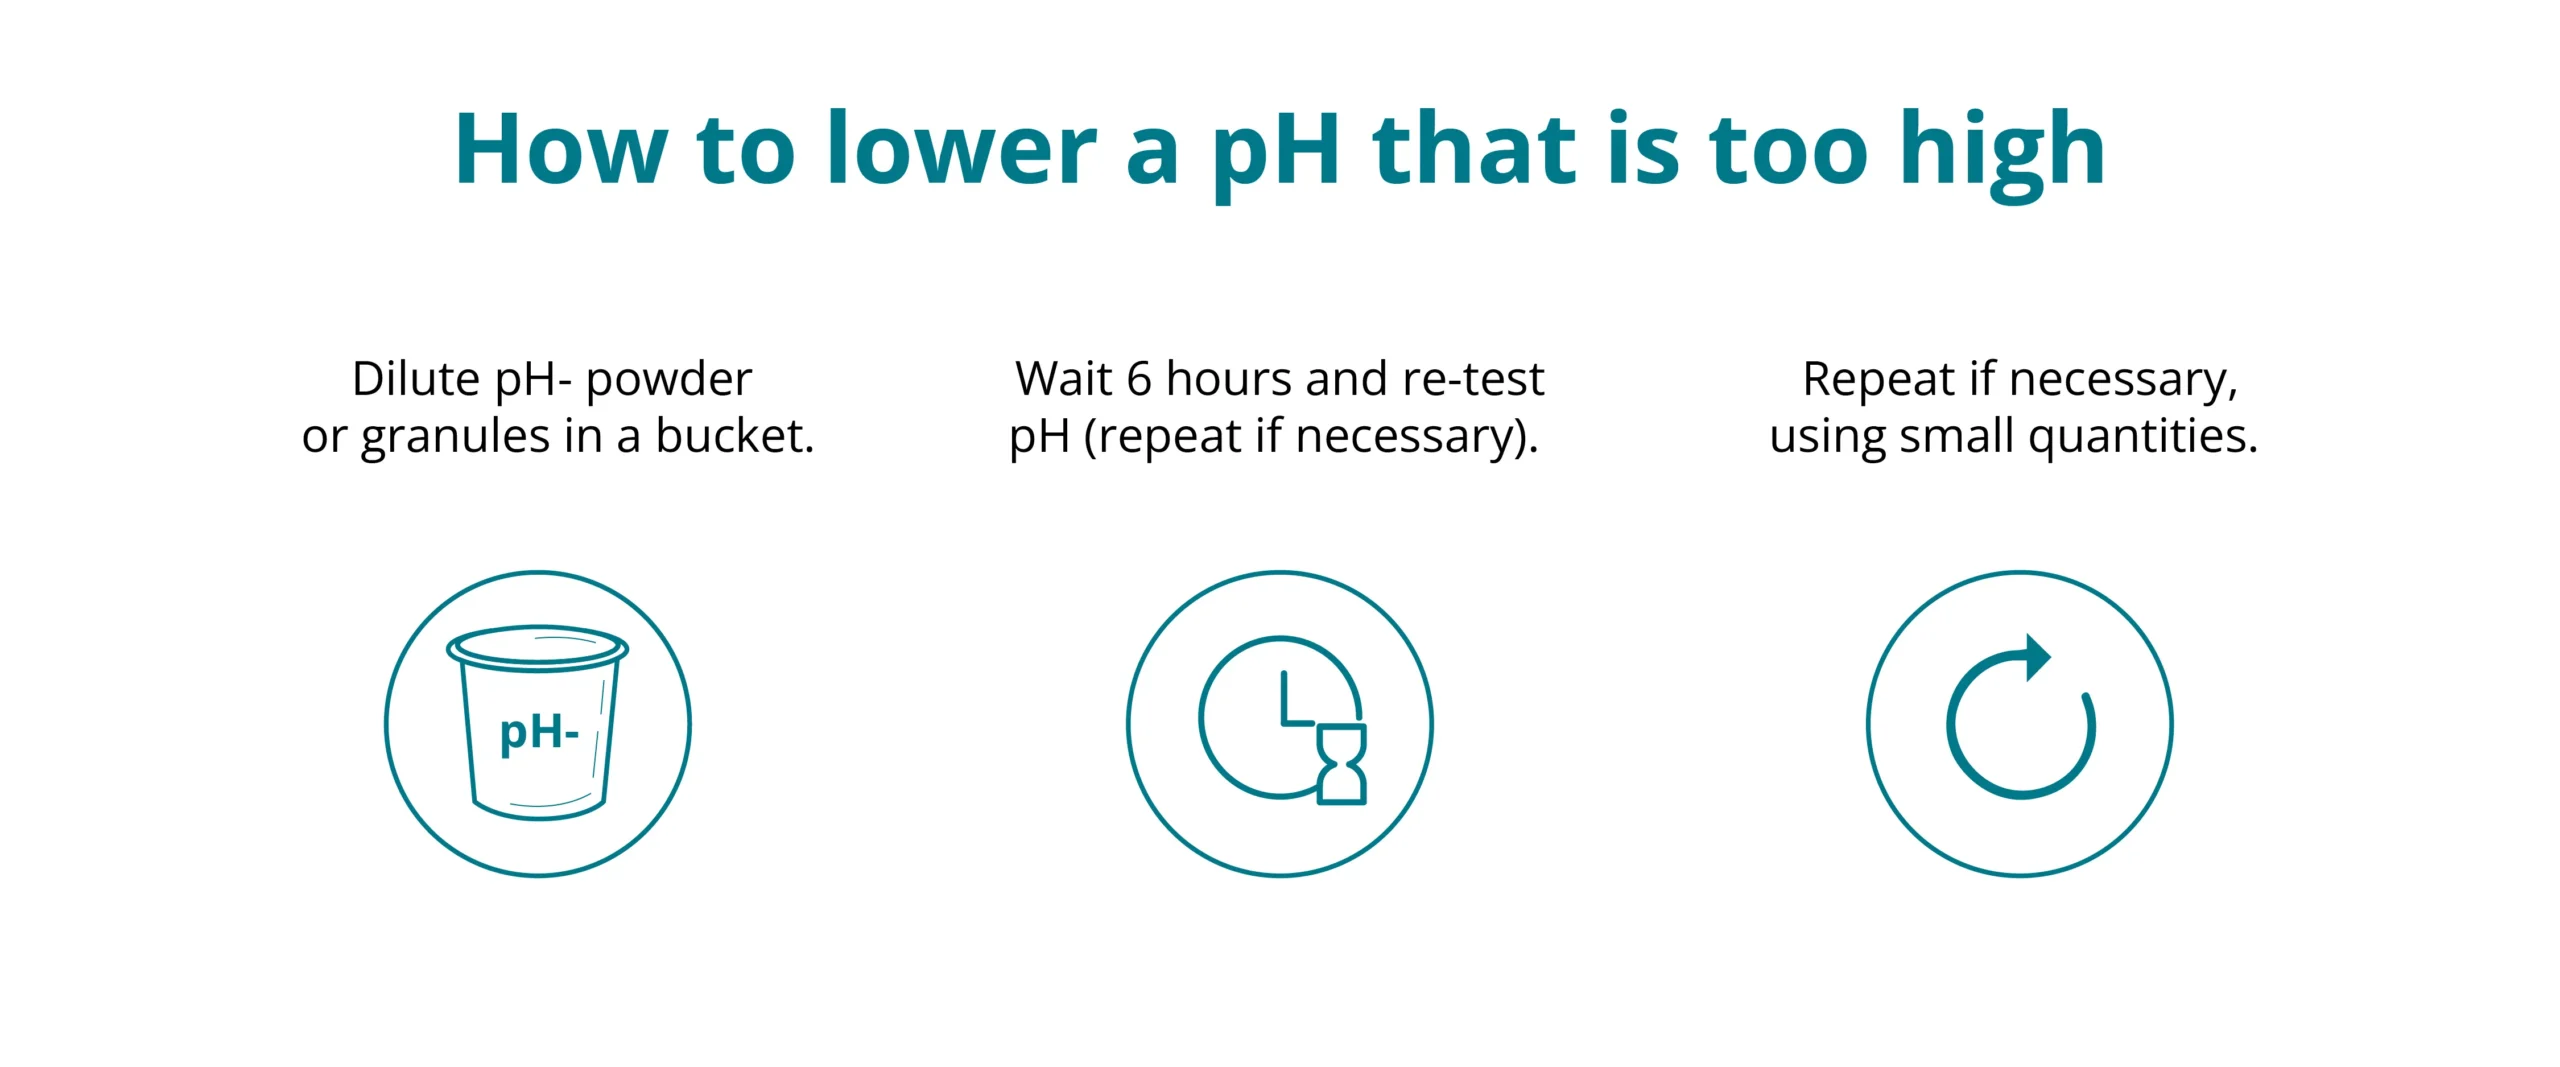 to lower pH, use pH- and filter pool water